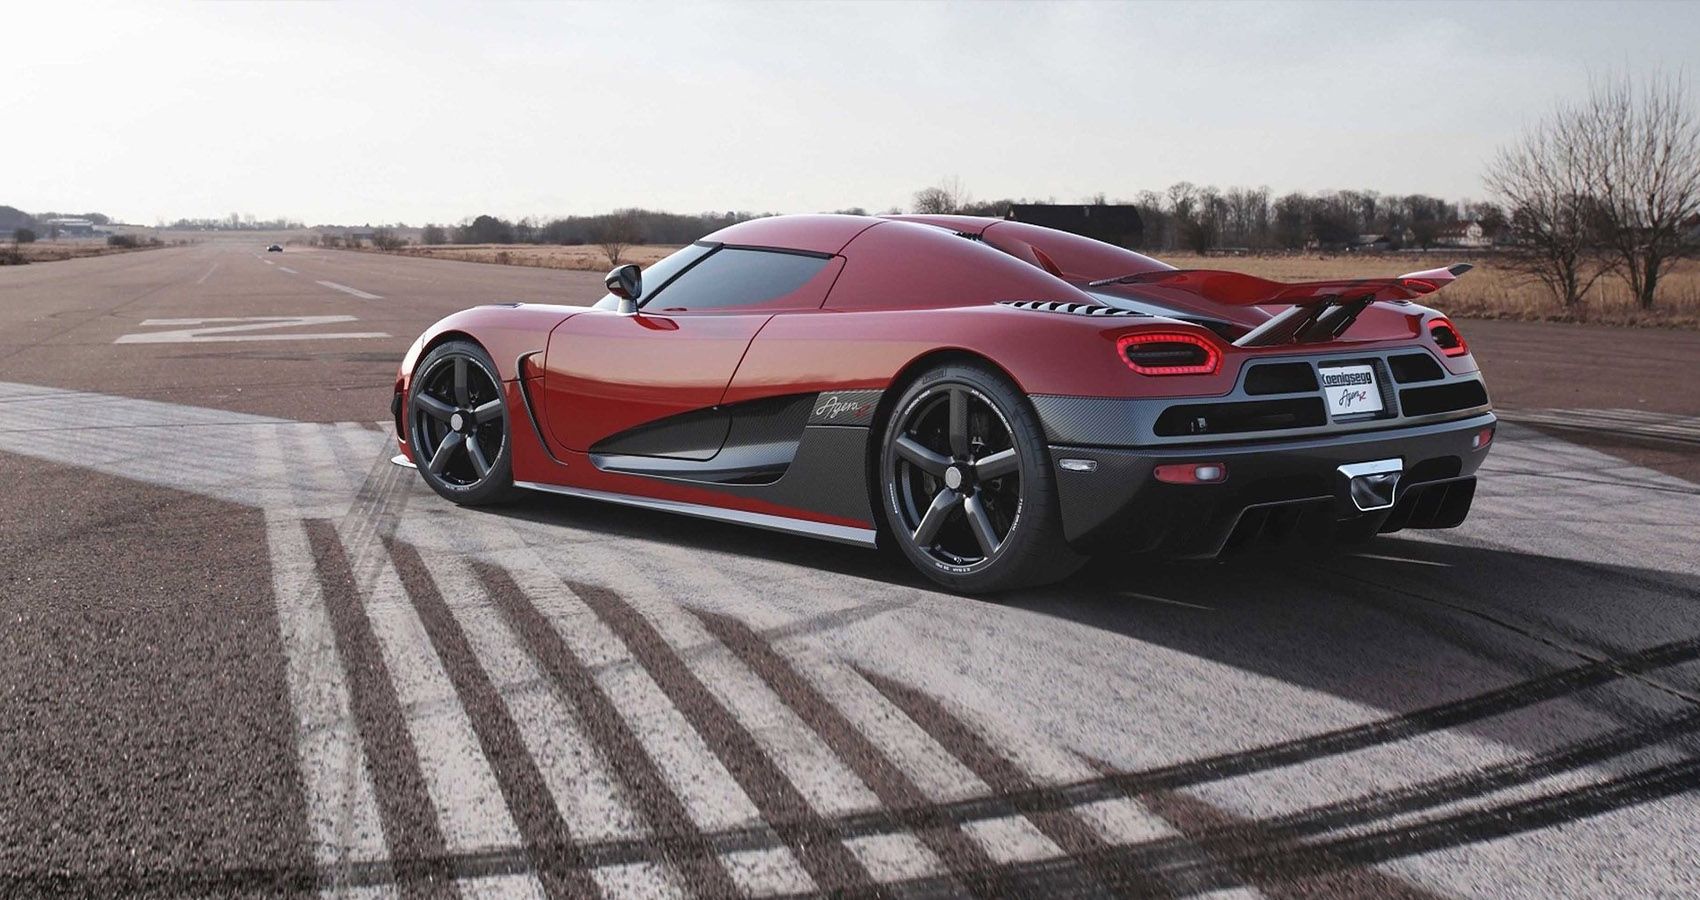 2012 Koenigsegg Agera R in red seen from the rear